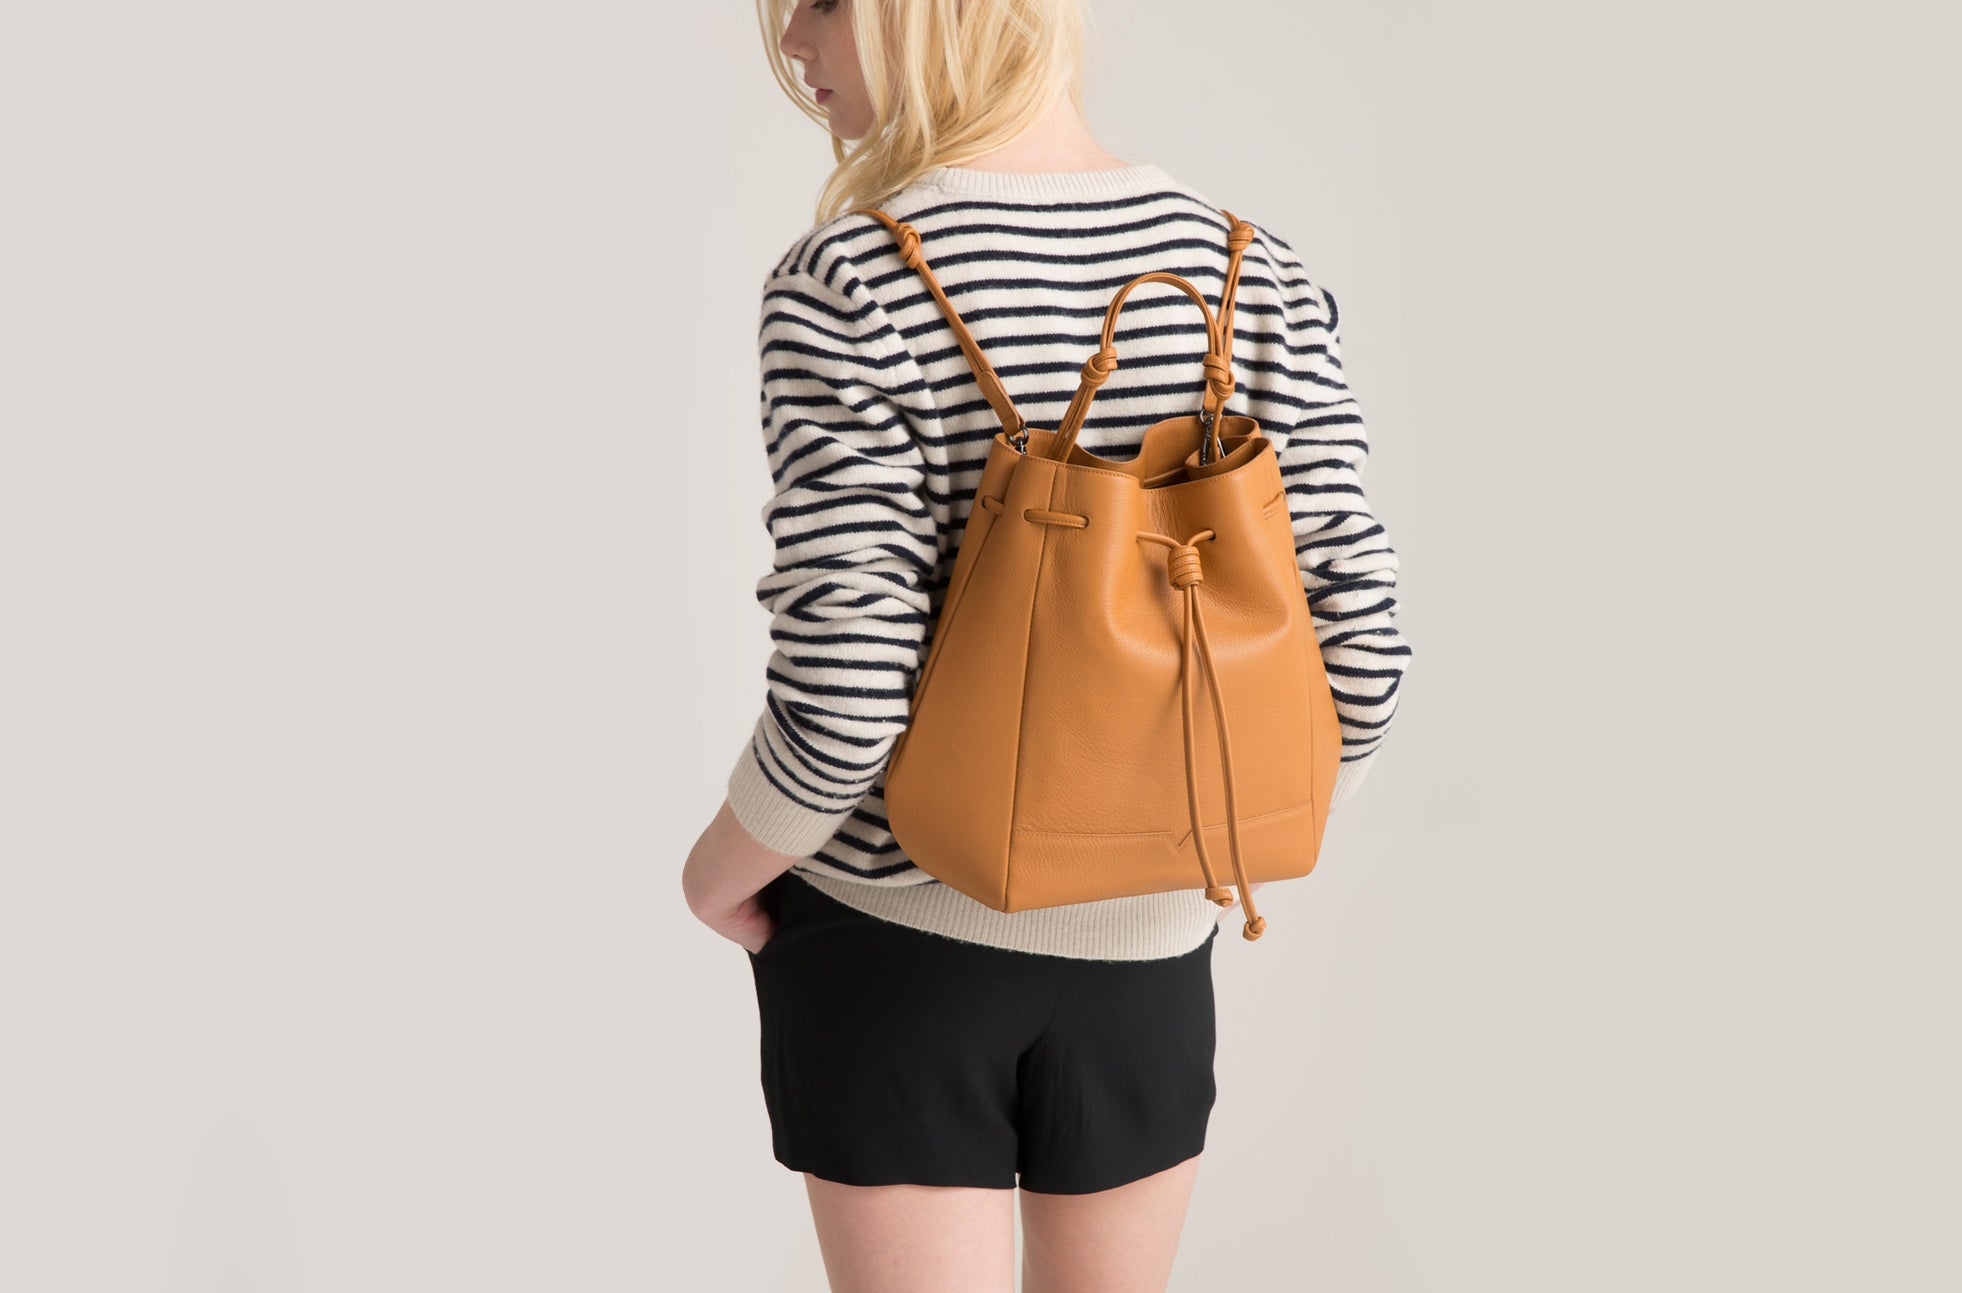 The Large Bucket Backpack in Technik-Leather in Caramel image 5